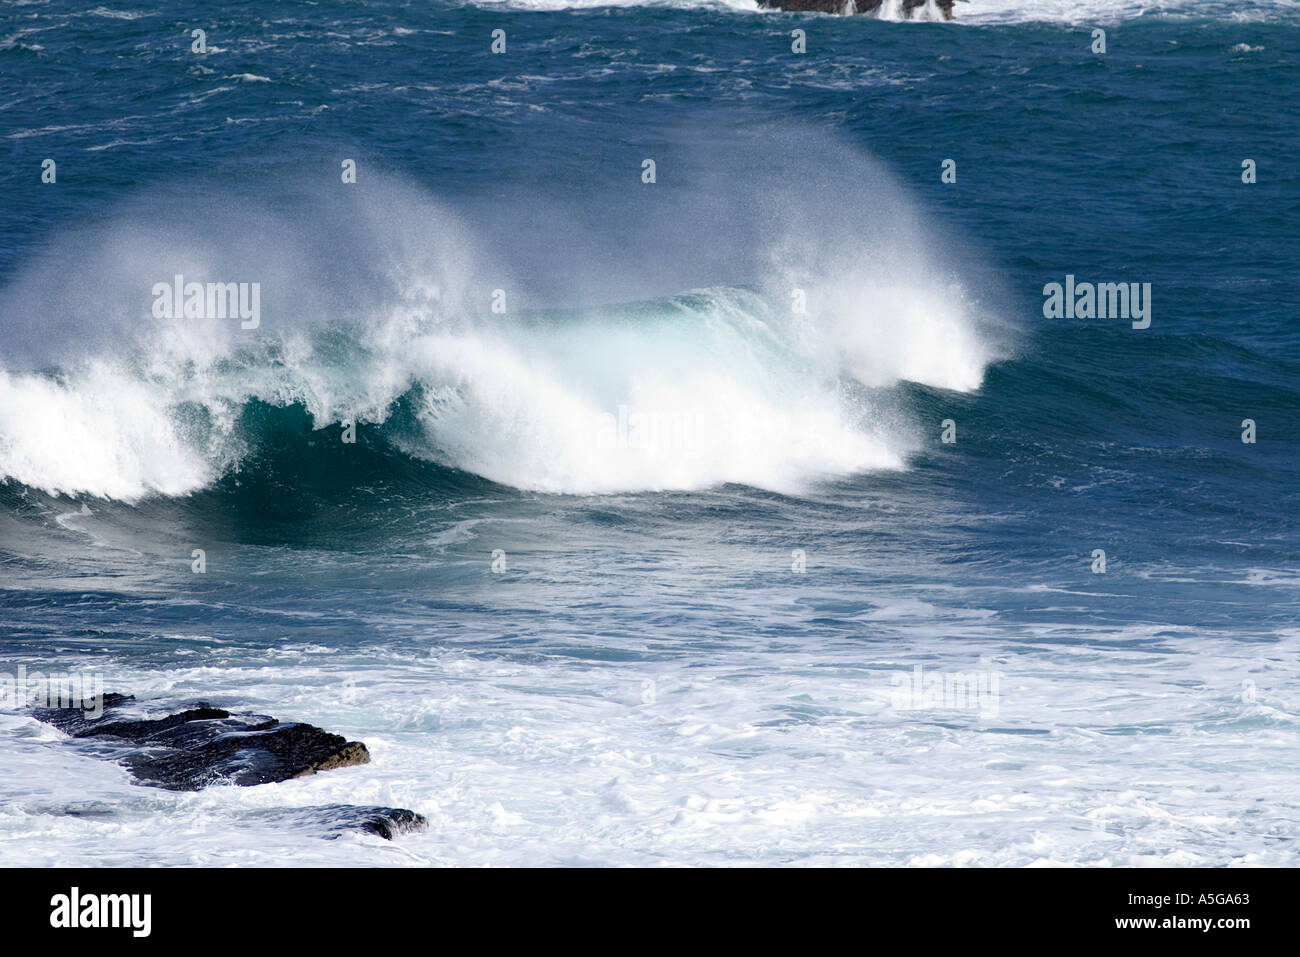 dh North coast BIRSAY ORKNEY Surf sea waves breaking on shore power rollers spray close up crashing big wave scotland Stock Photo